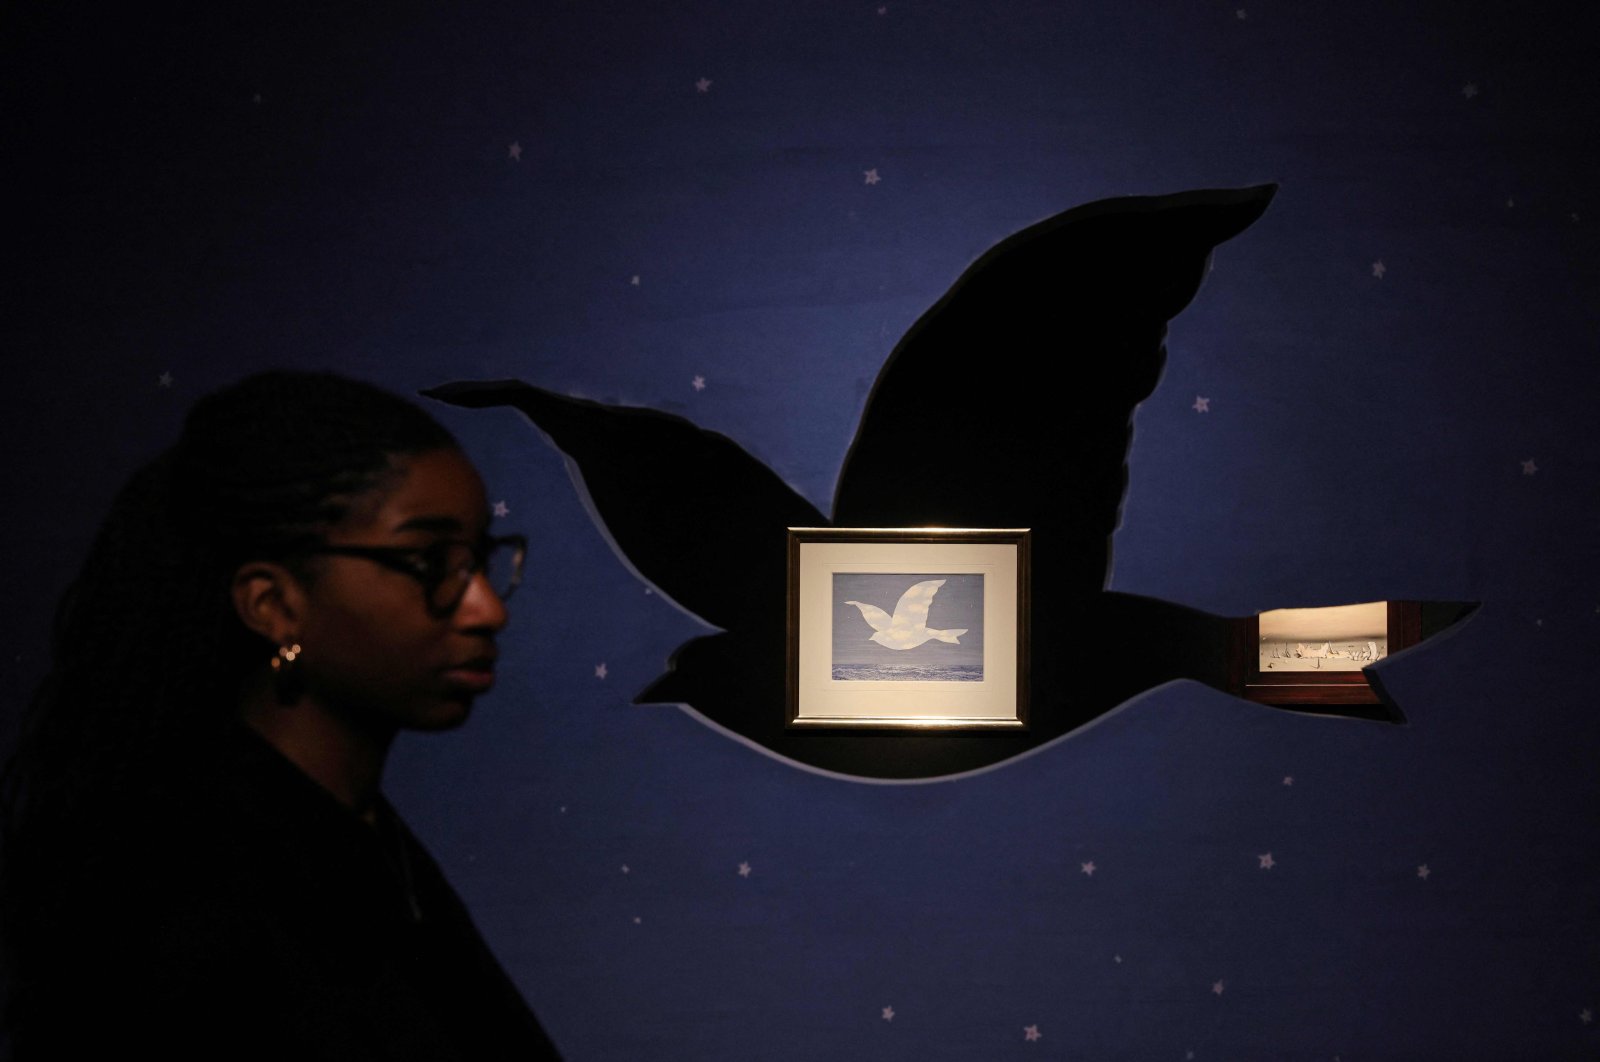 A gallery employee looks on alongside "Souvenir de voyage" painting by Belgian artist Rene Magritte at Christie&#039;s auction house during the press preview ahead of "The Art of the Surreal evening sale"  London, U.K., Feb. 21, 2023. (AFP Photo)